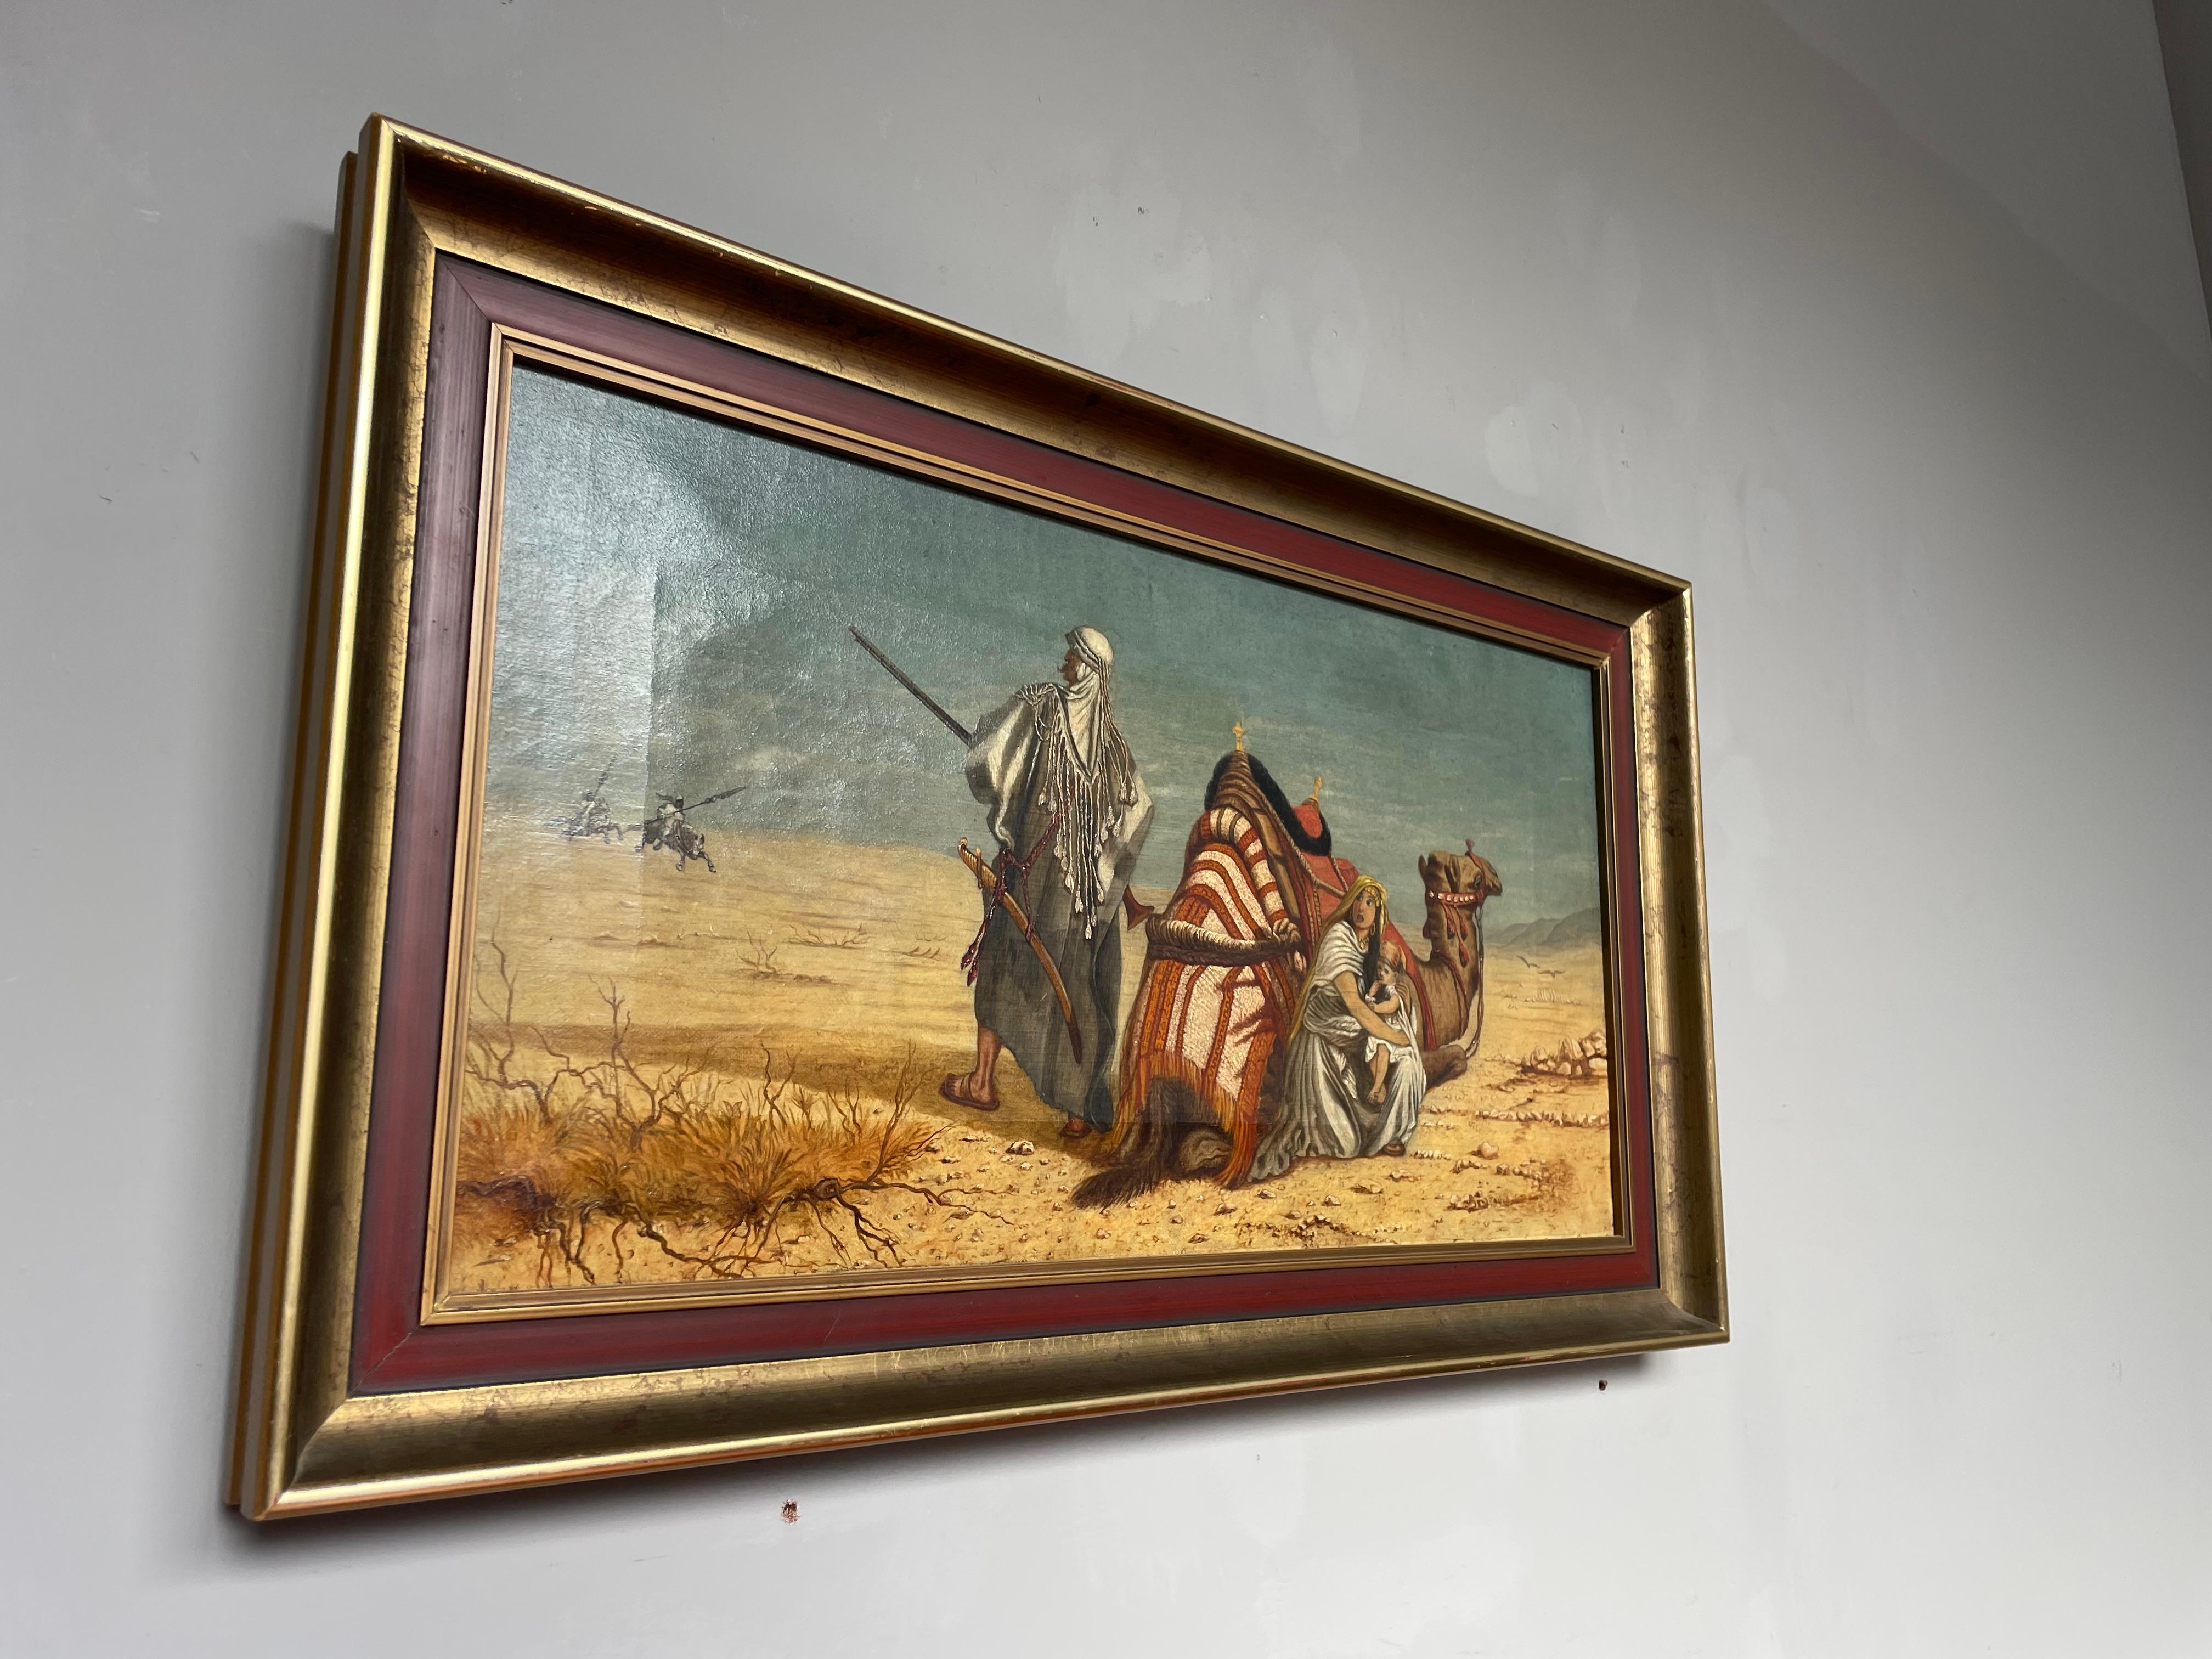 Antiquities Oil on Canvas Painting Arabic Male & Camel in Desert Protecting Spouse en vente 2